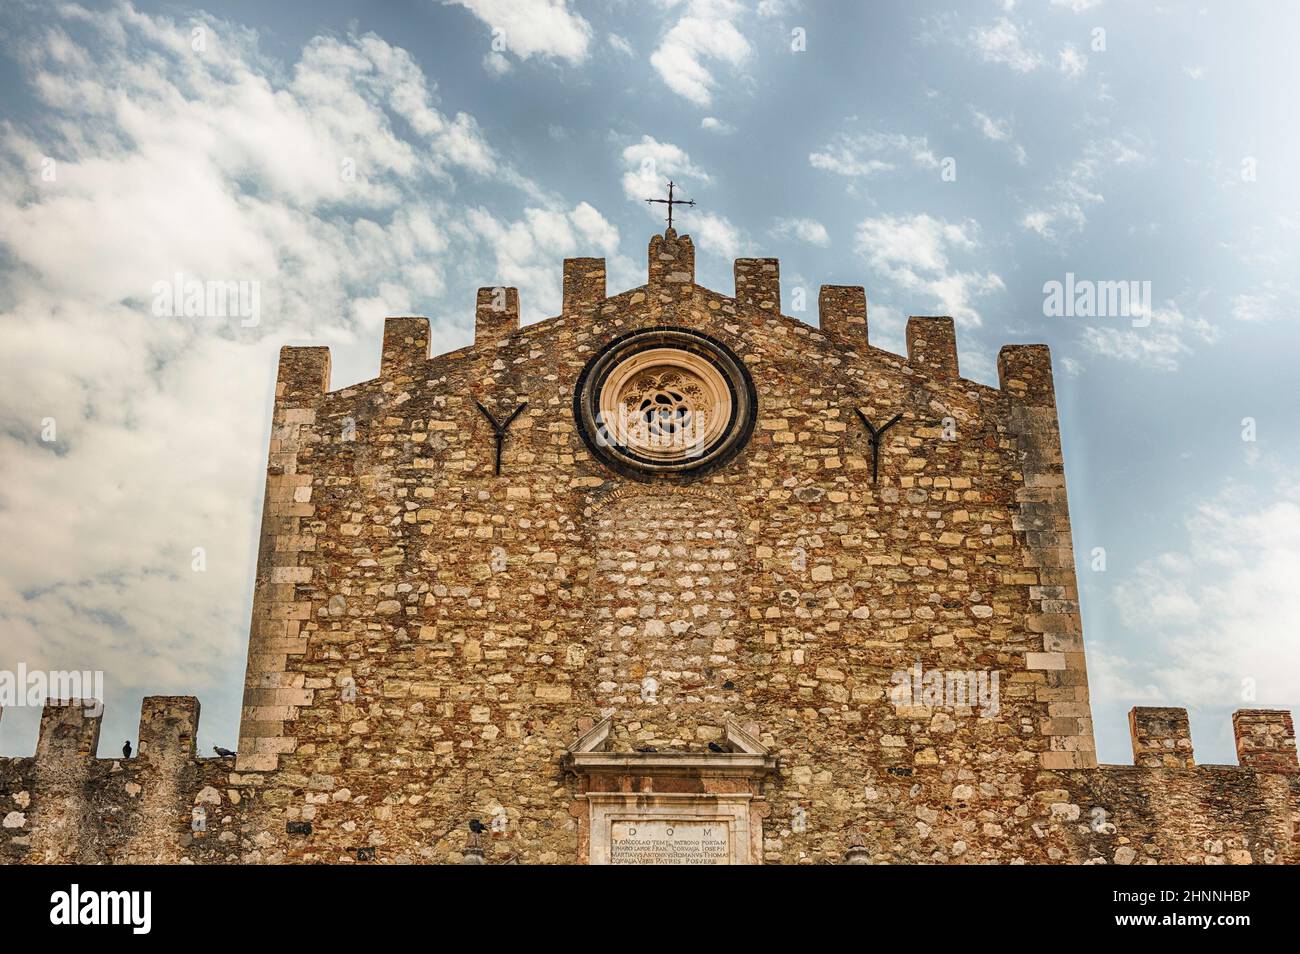 Facade of St. Nicholas Cathedral in Taormina, Sicily, Italy Stock Photo